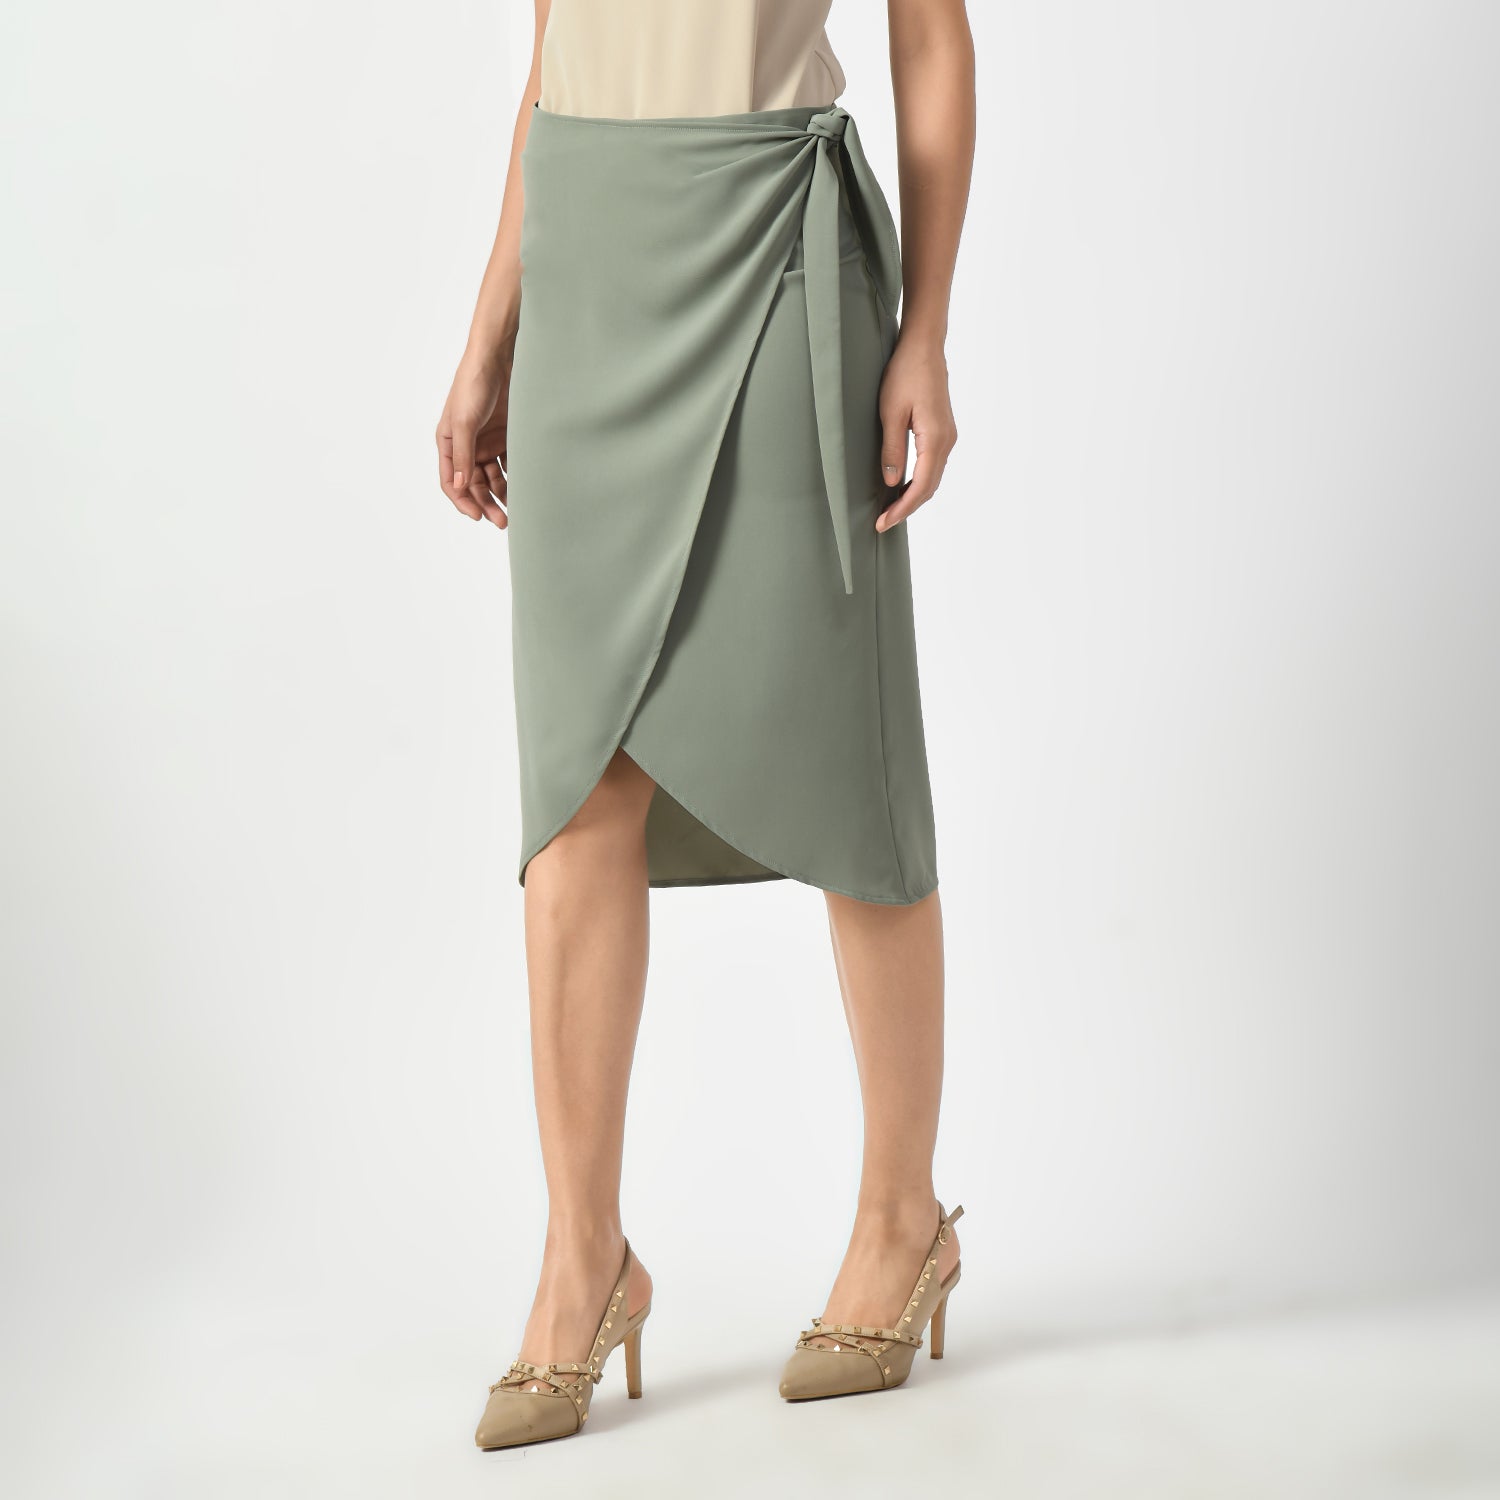 Dusty Green Overlap Skirt With Tie Knot